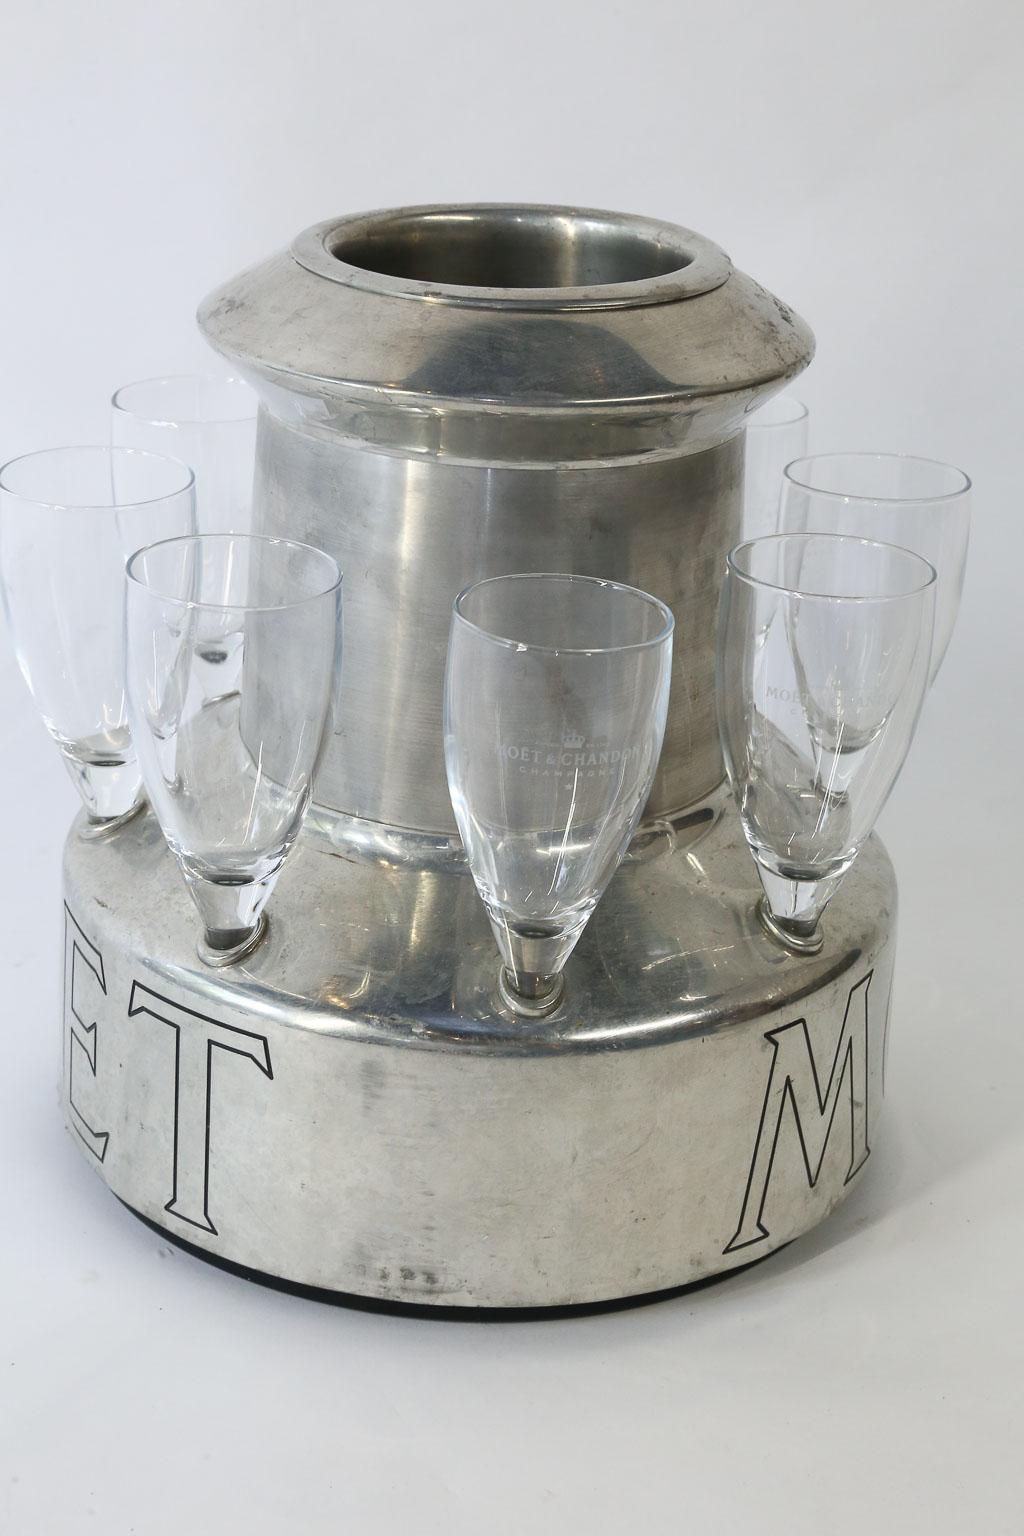 Stainless Steel Moet Chandon Champagne Cooler and Glasses